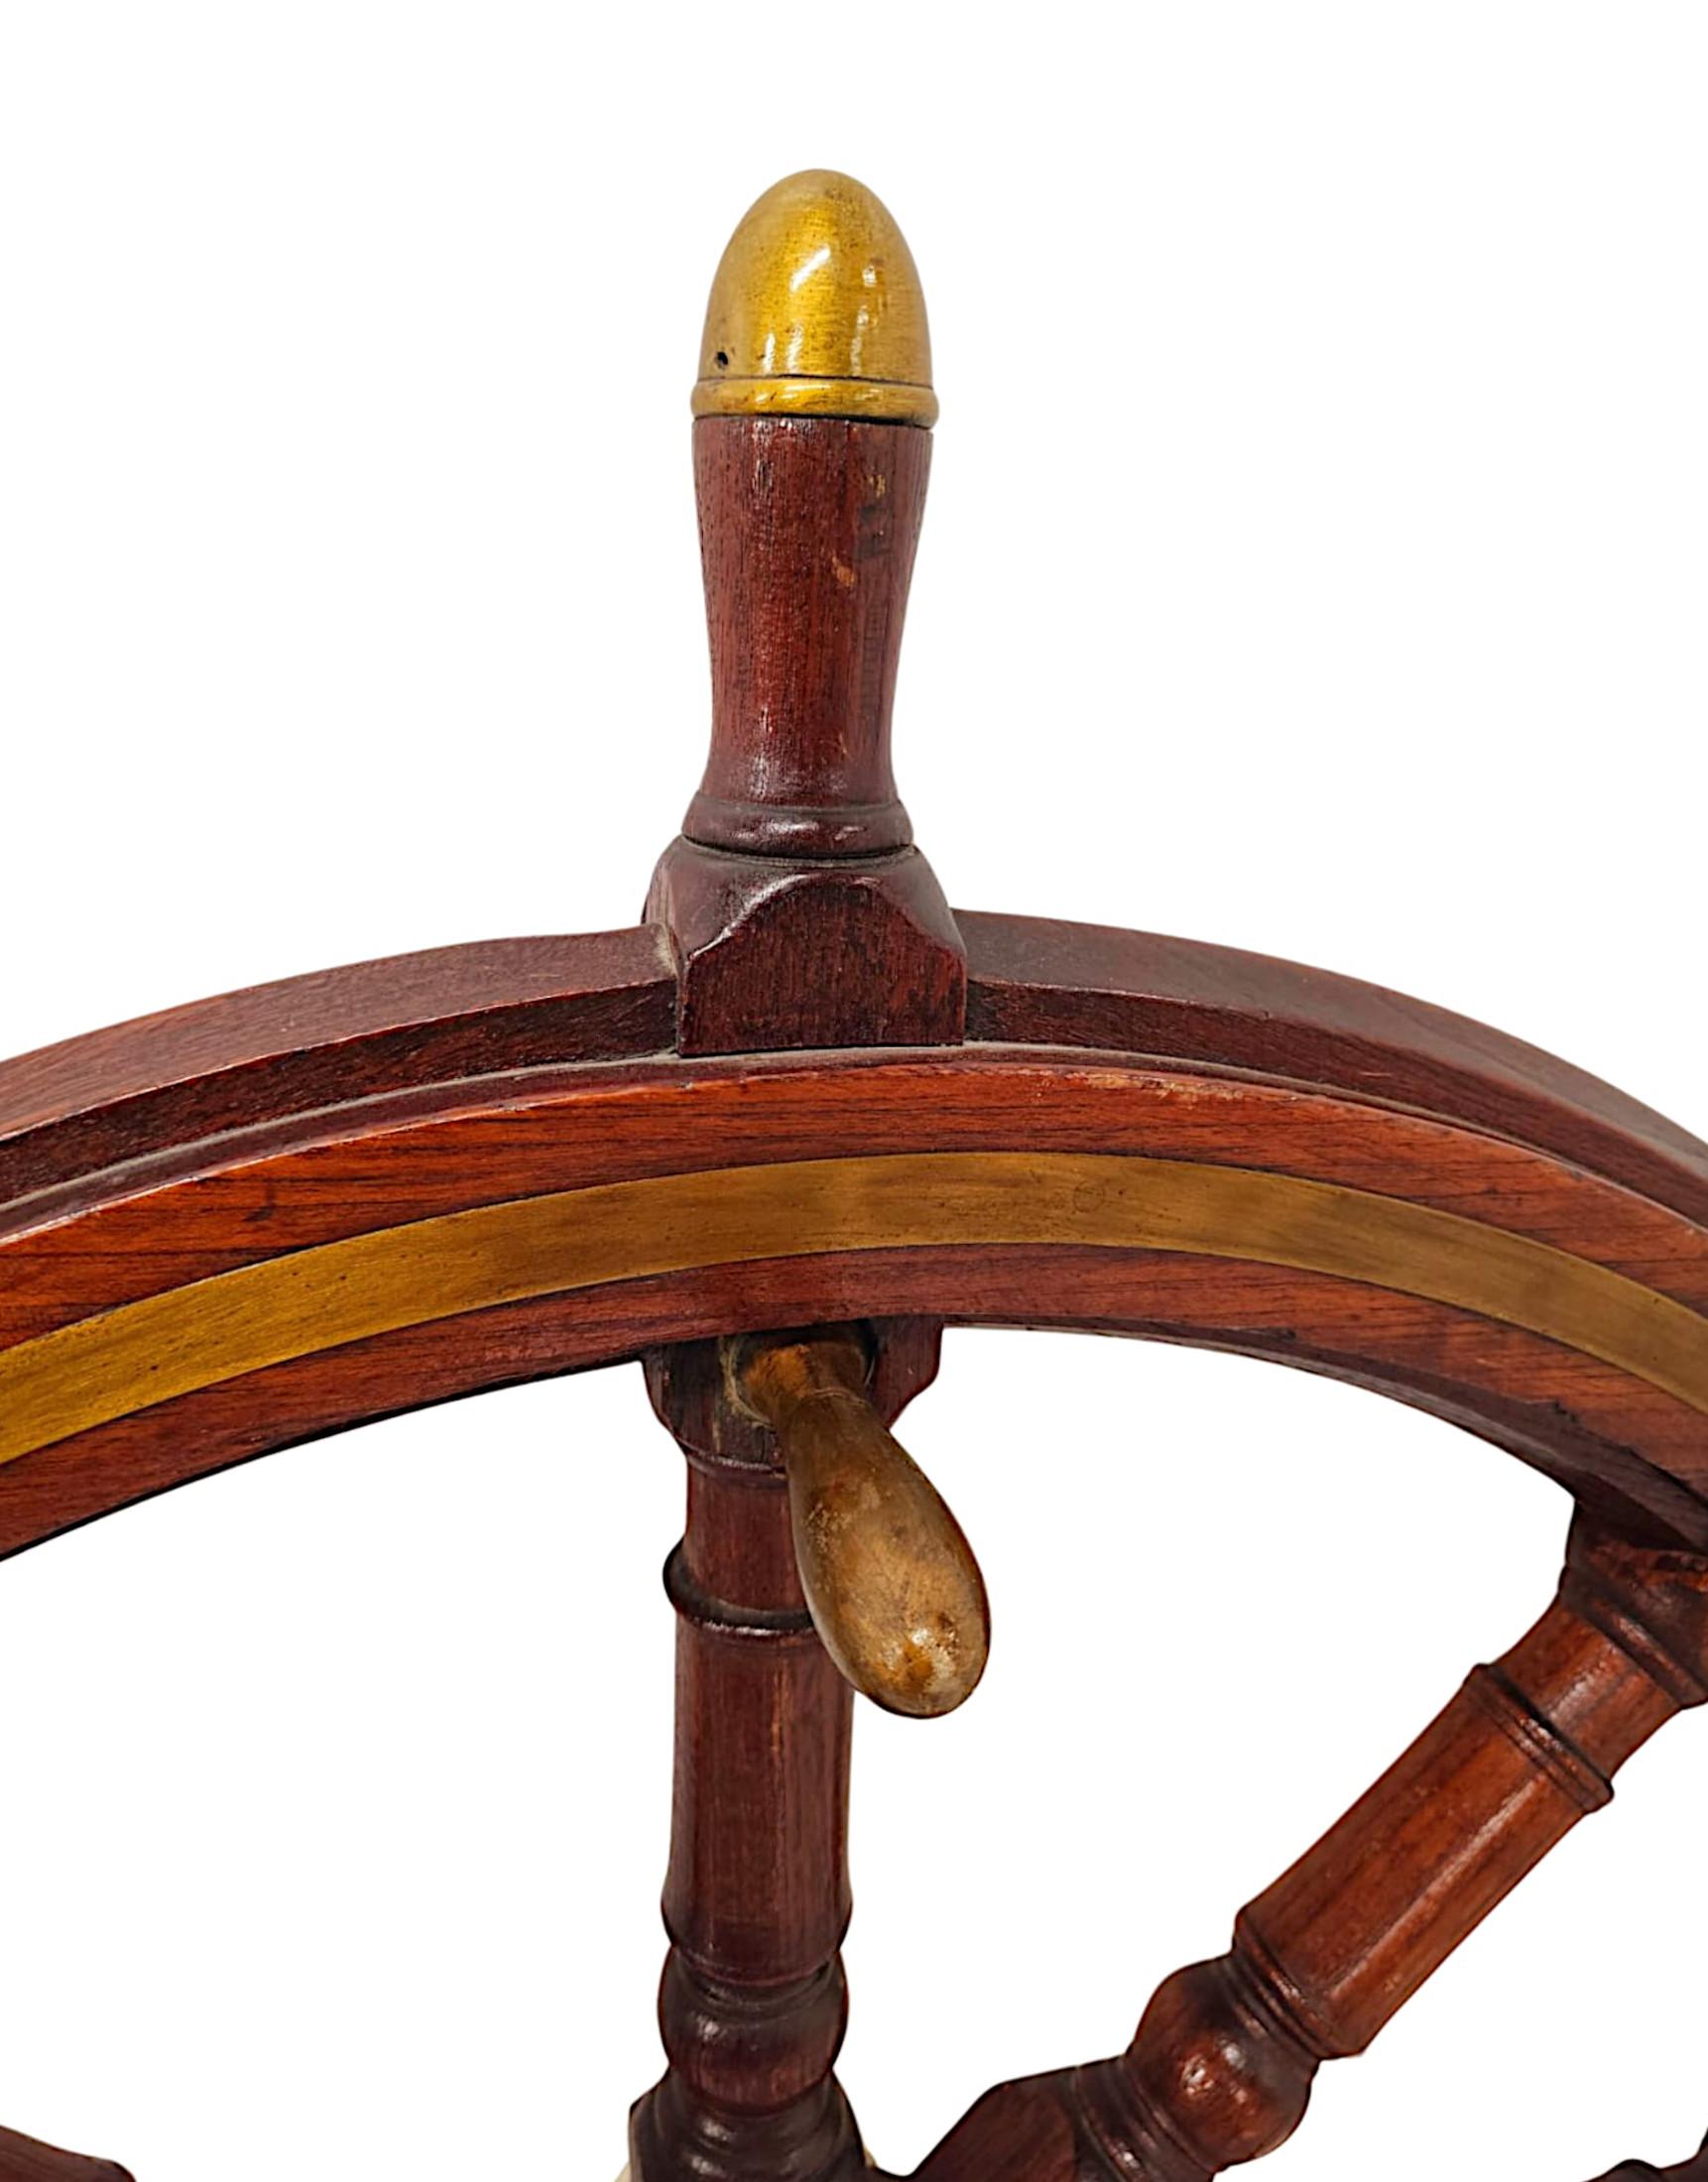 English  A Very Fine Large Size 19th Century Teak and Brass Ships Wheel  For Sale